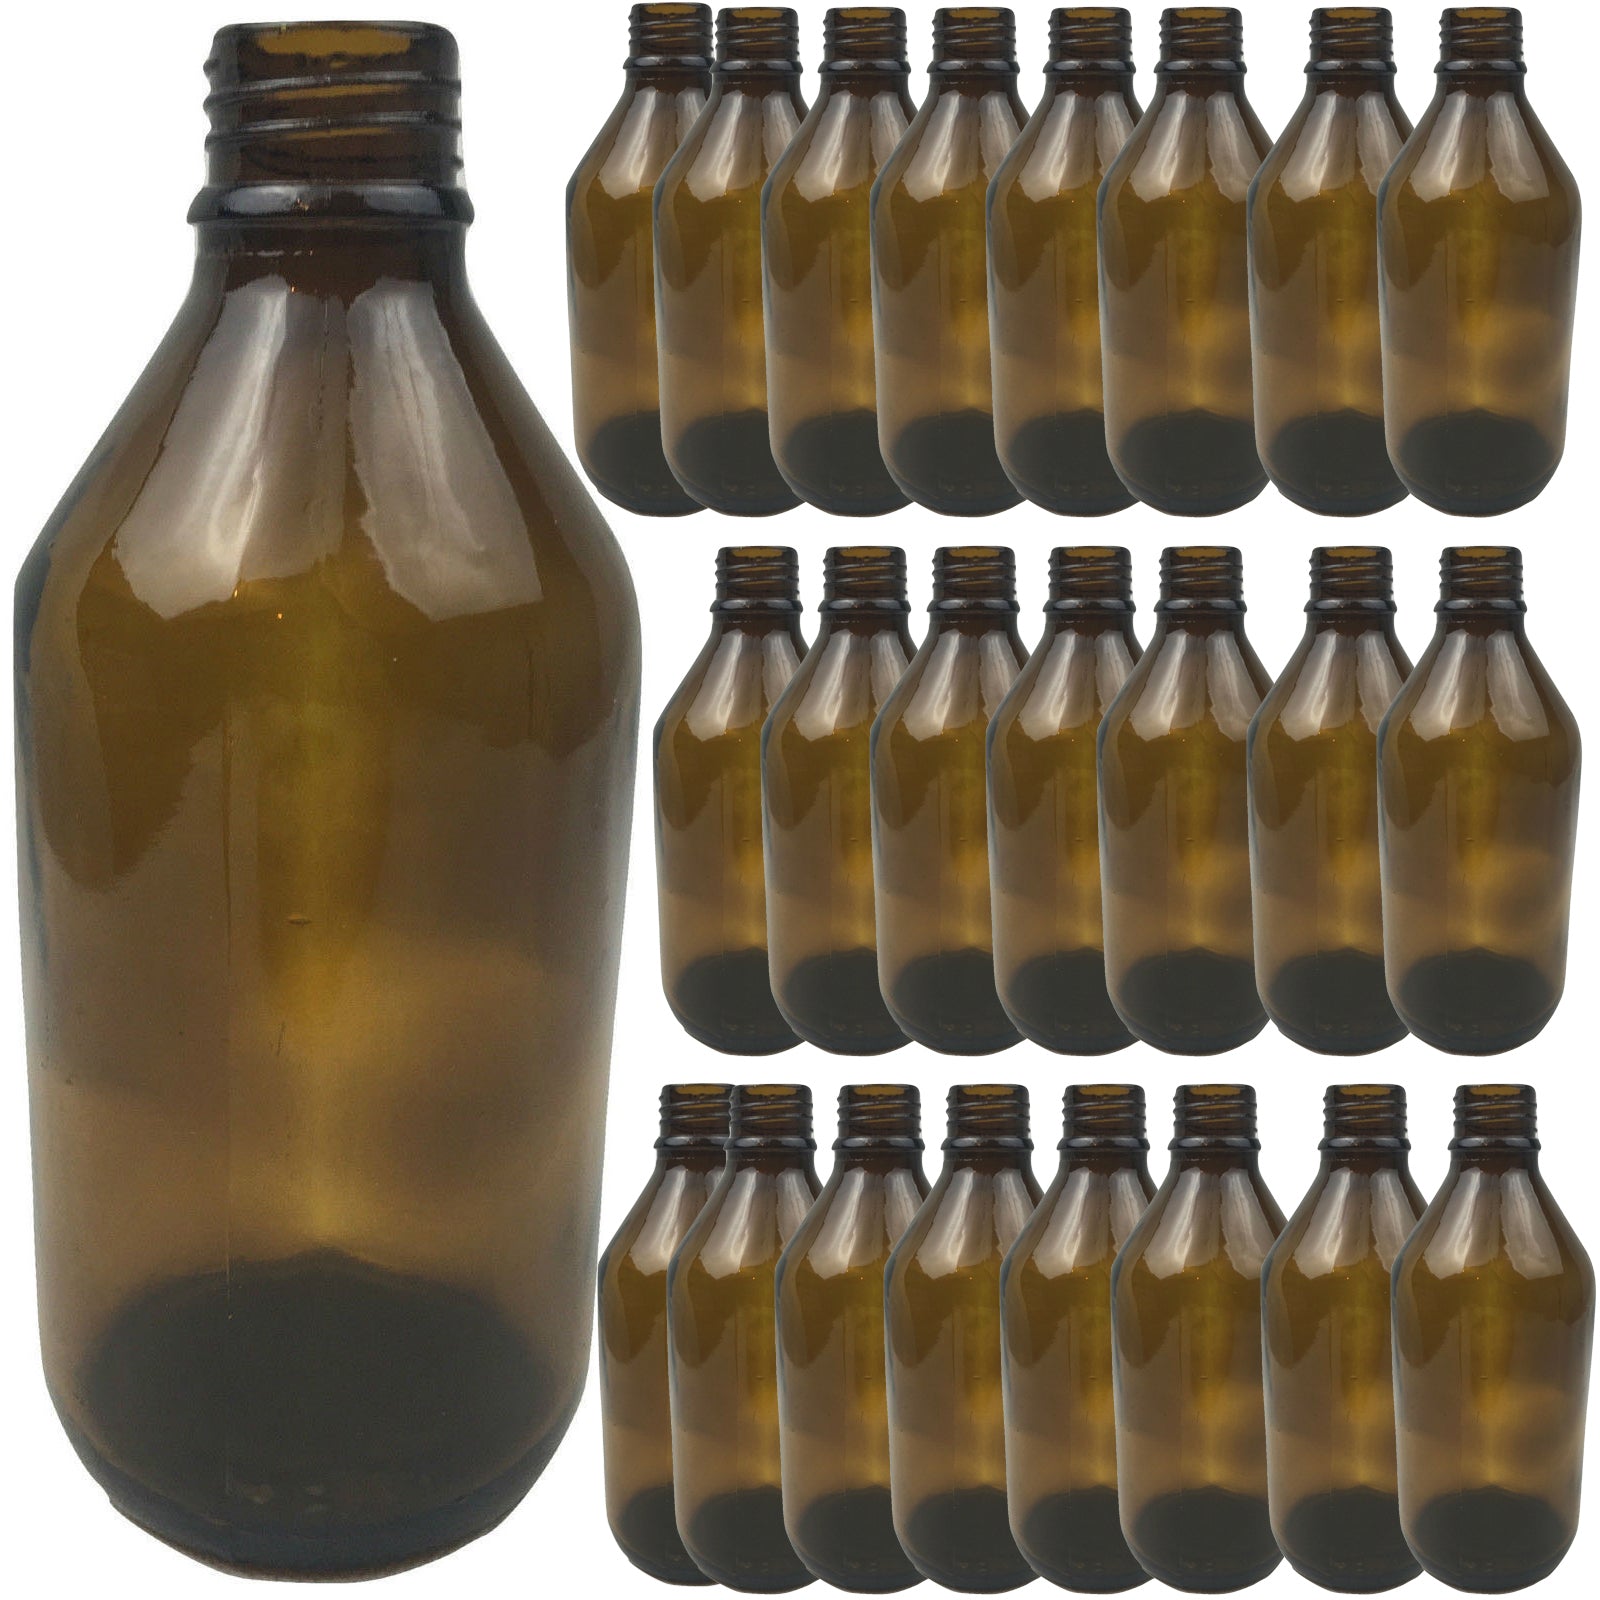 24x 600ml own Glass Bottle Plinking Shooting Target Practice without Lids/Caps